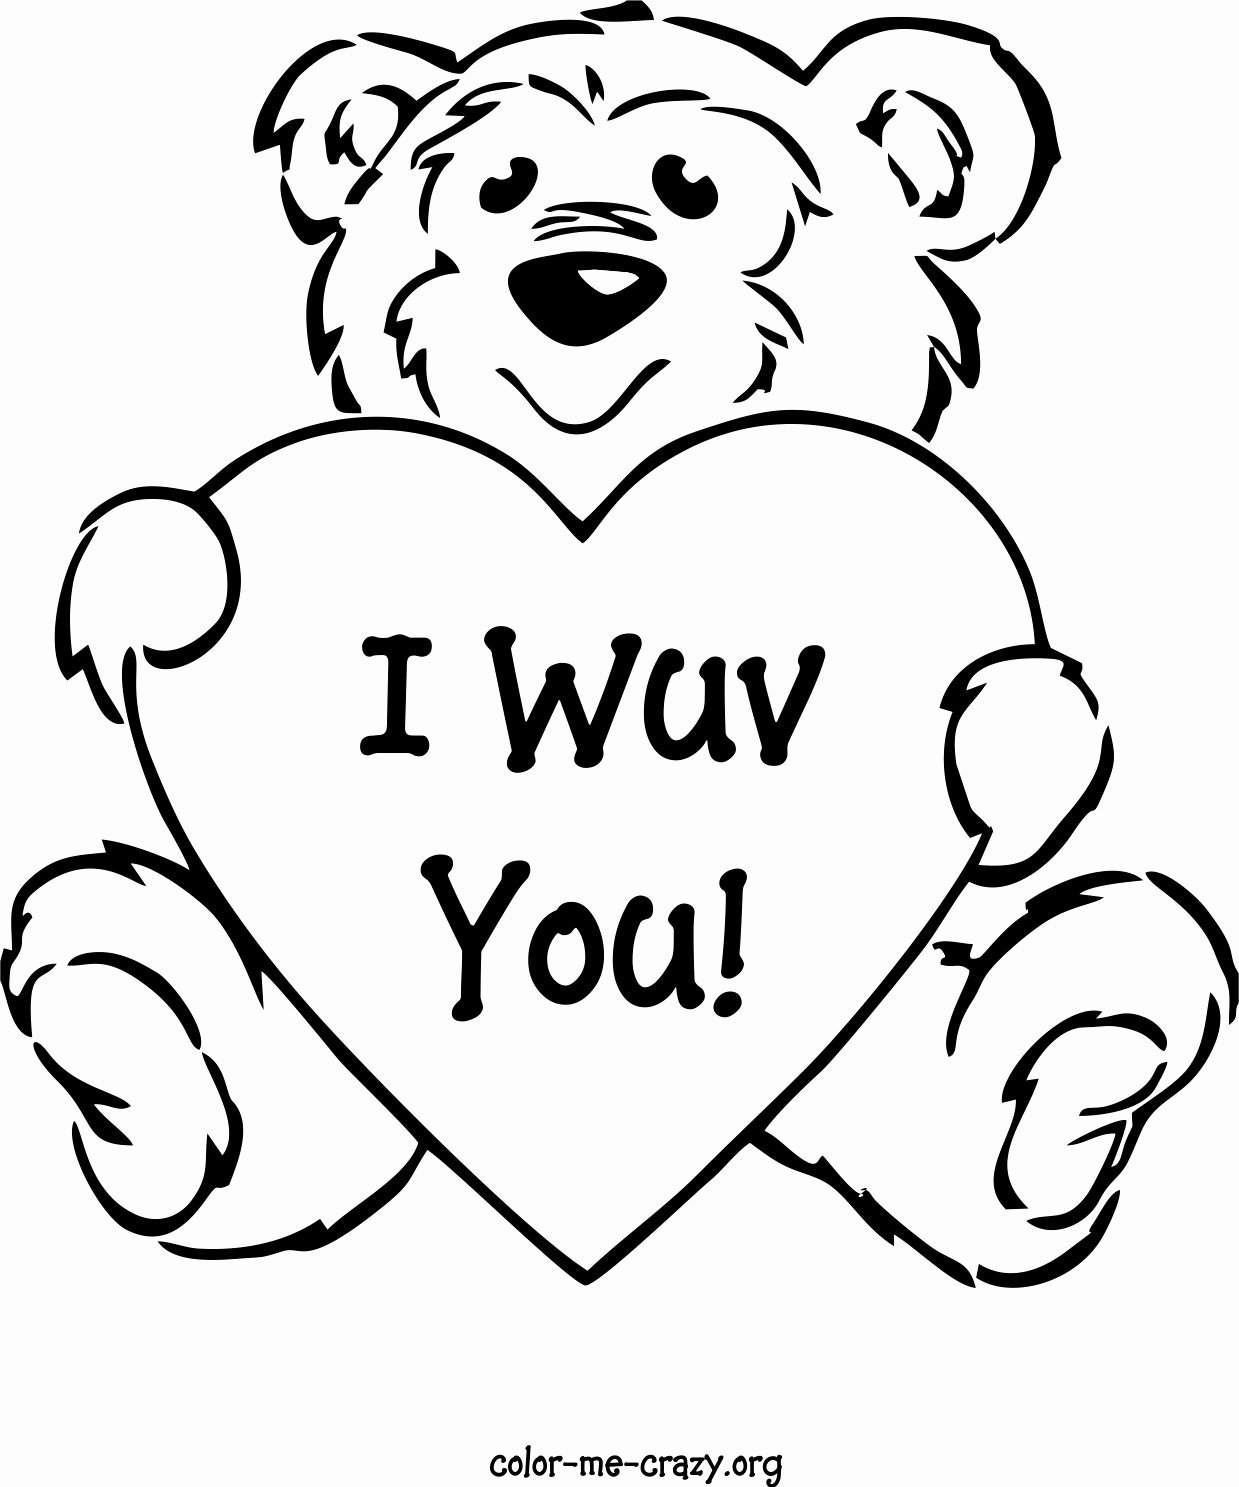 Cute Love Coloring Pages | Meriwer Coloring